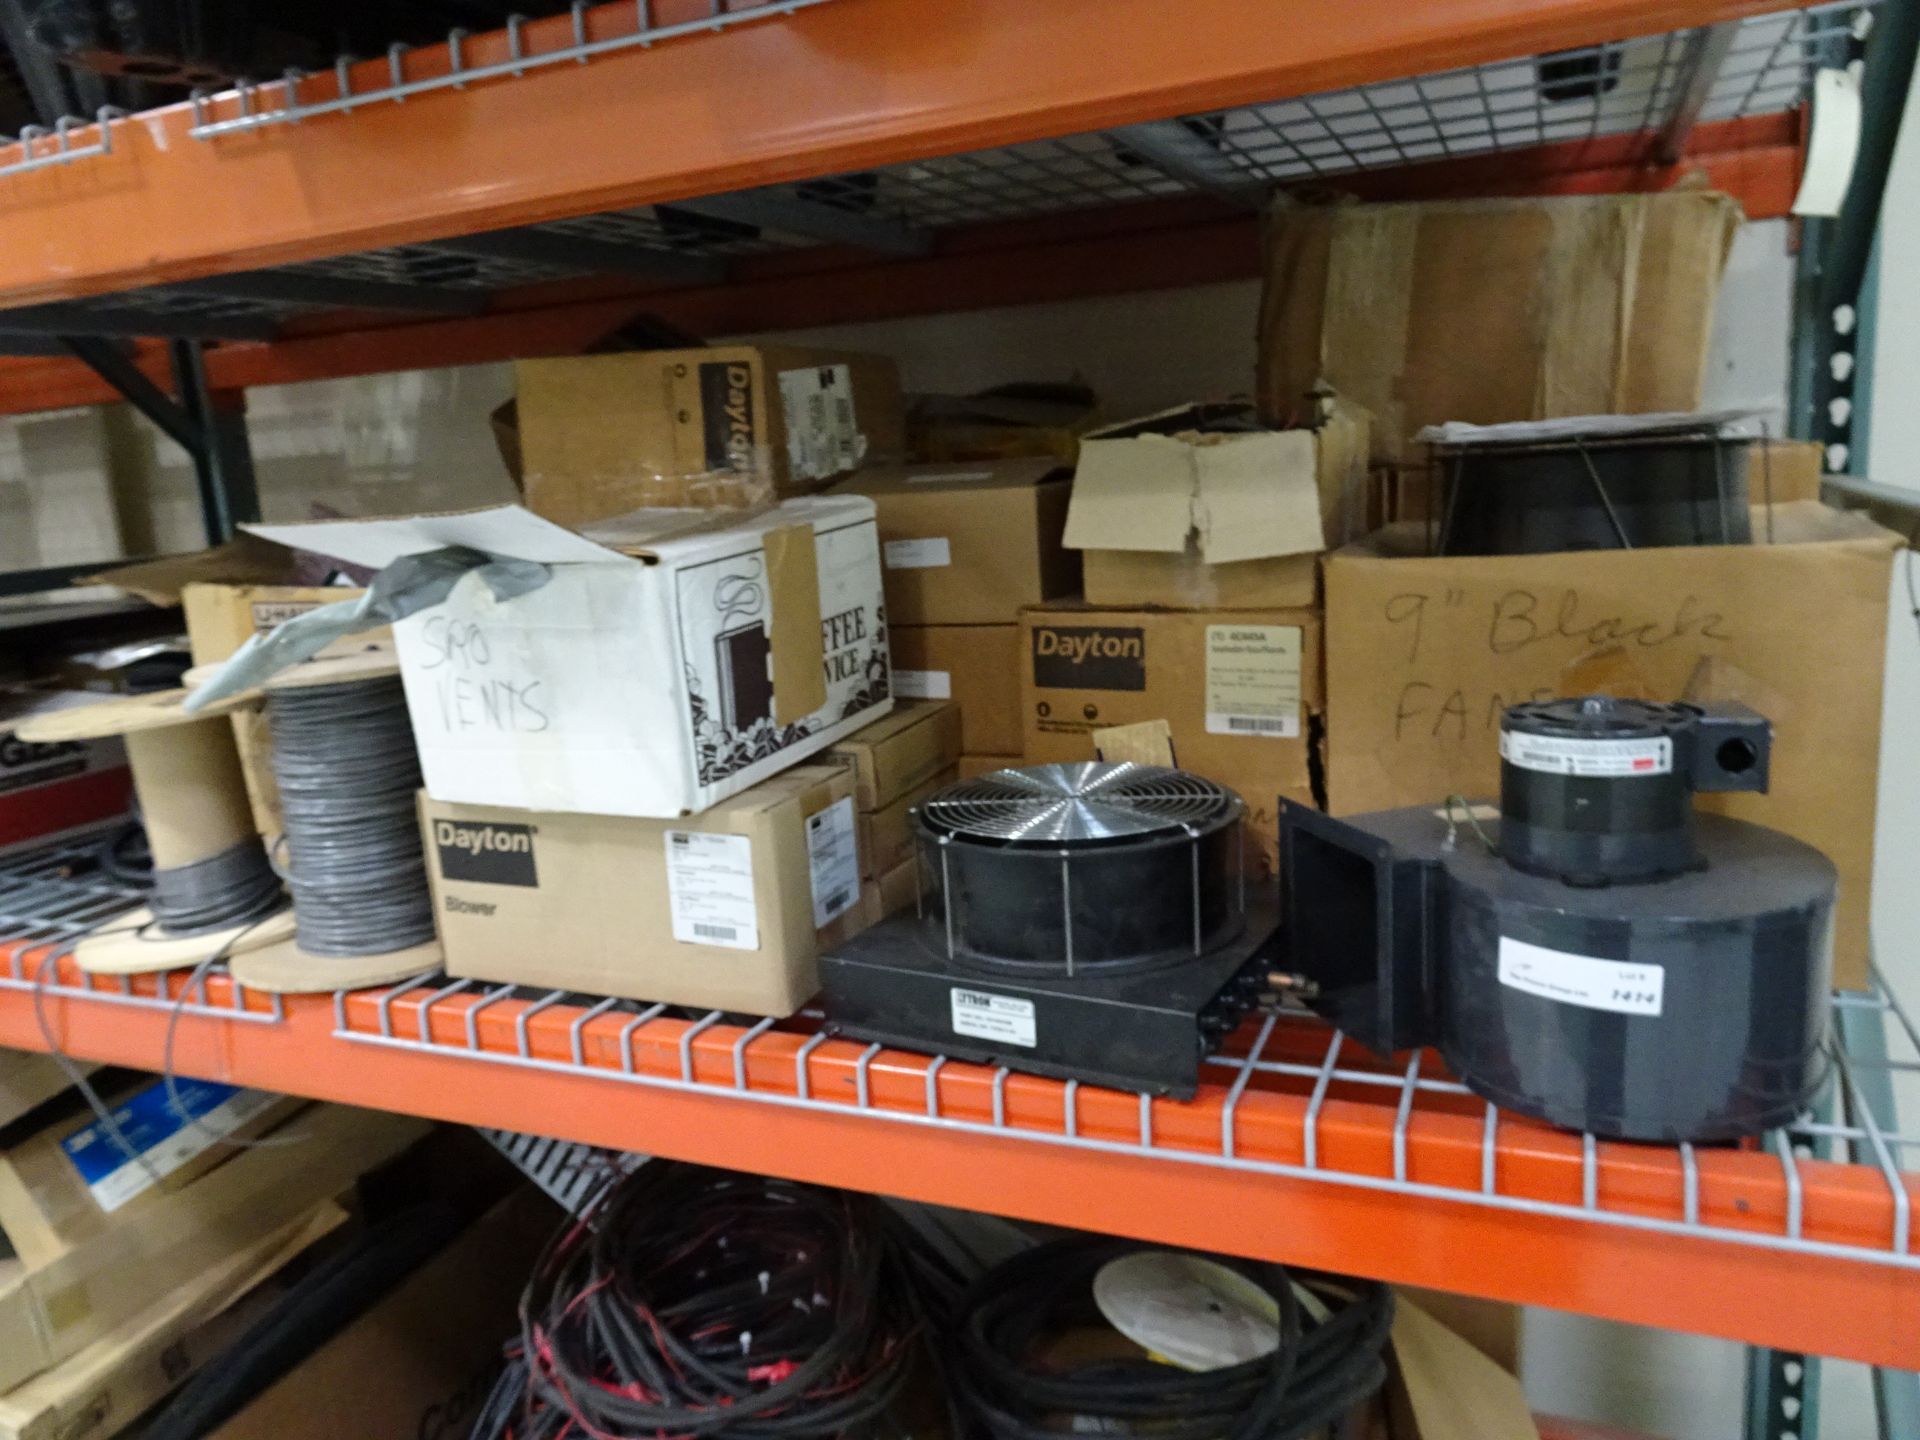 (1) Lot Of Miscellaneous Dayton Blowers, Blower Fans, Vents, Fans, And Assorted Other Equipment - Image 2 of 4